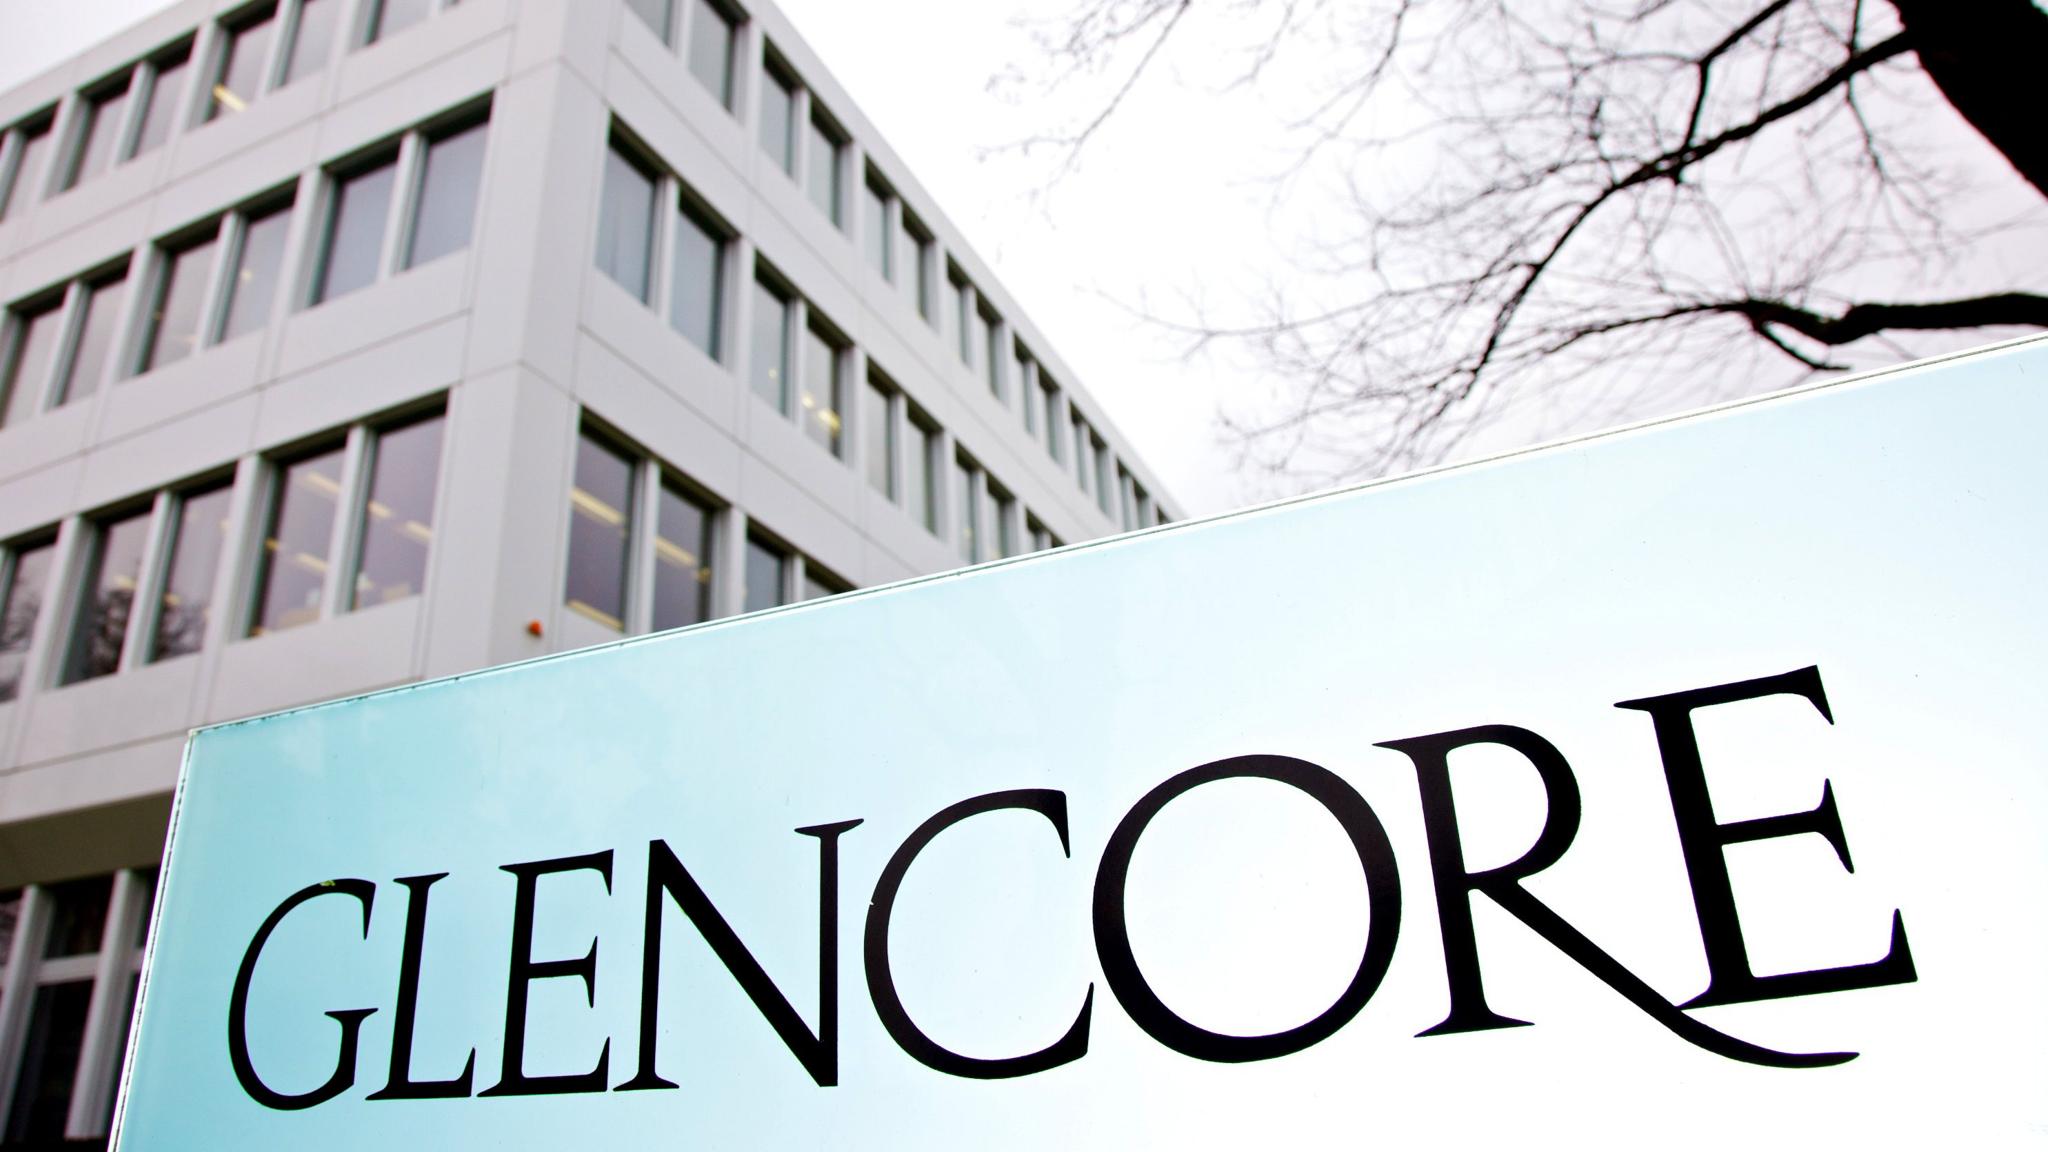 Glencore expects higher copper production in 2019